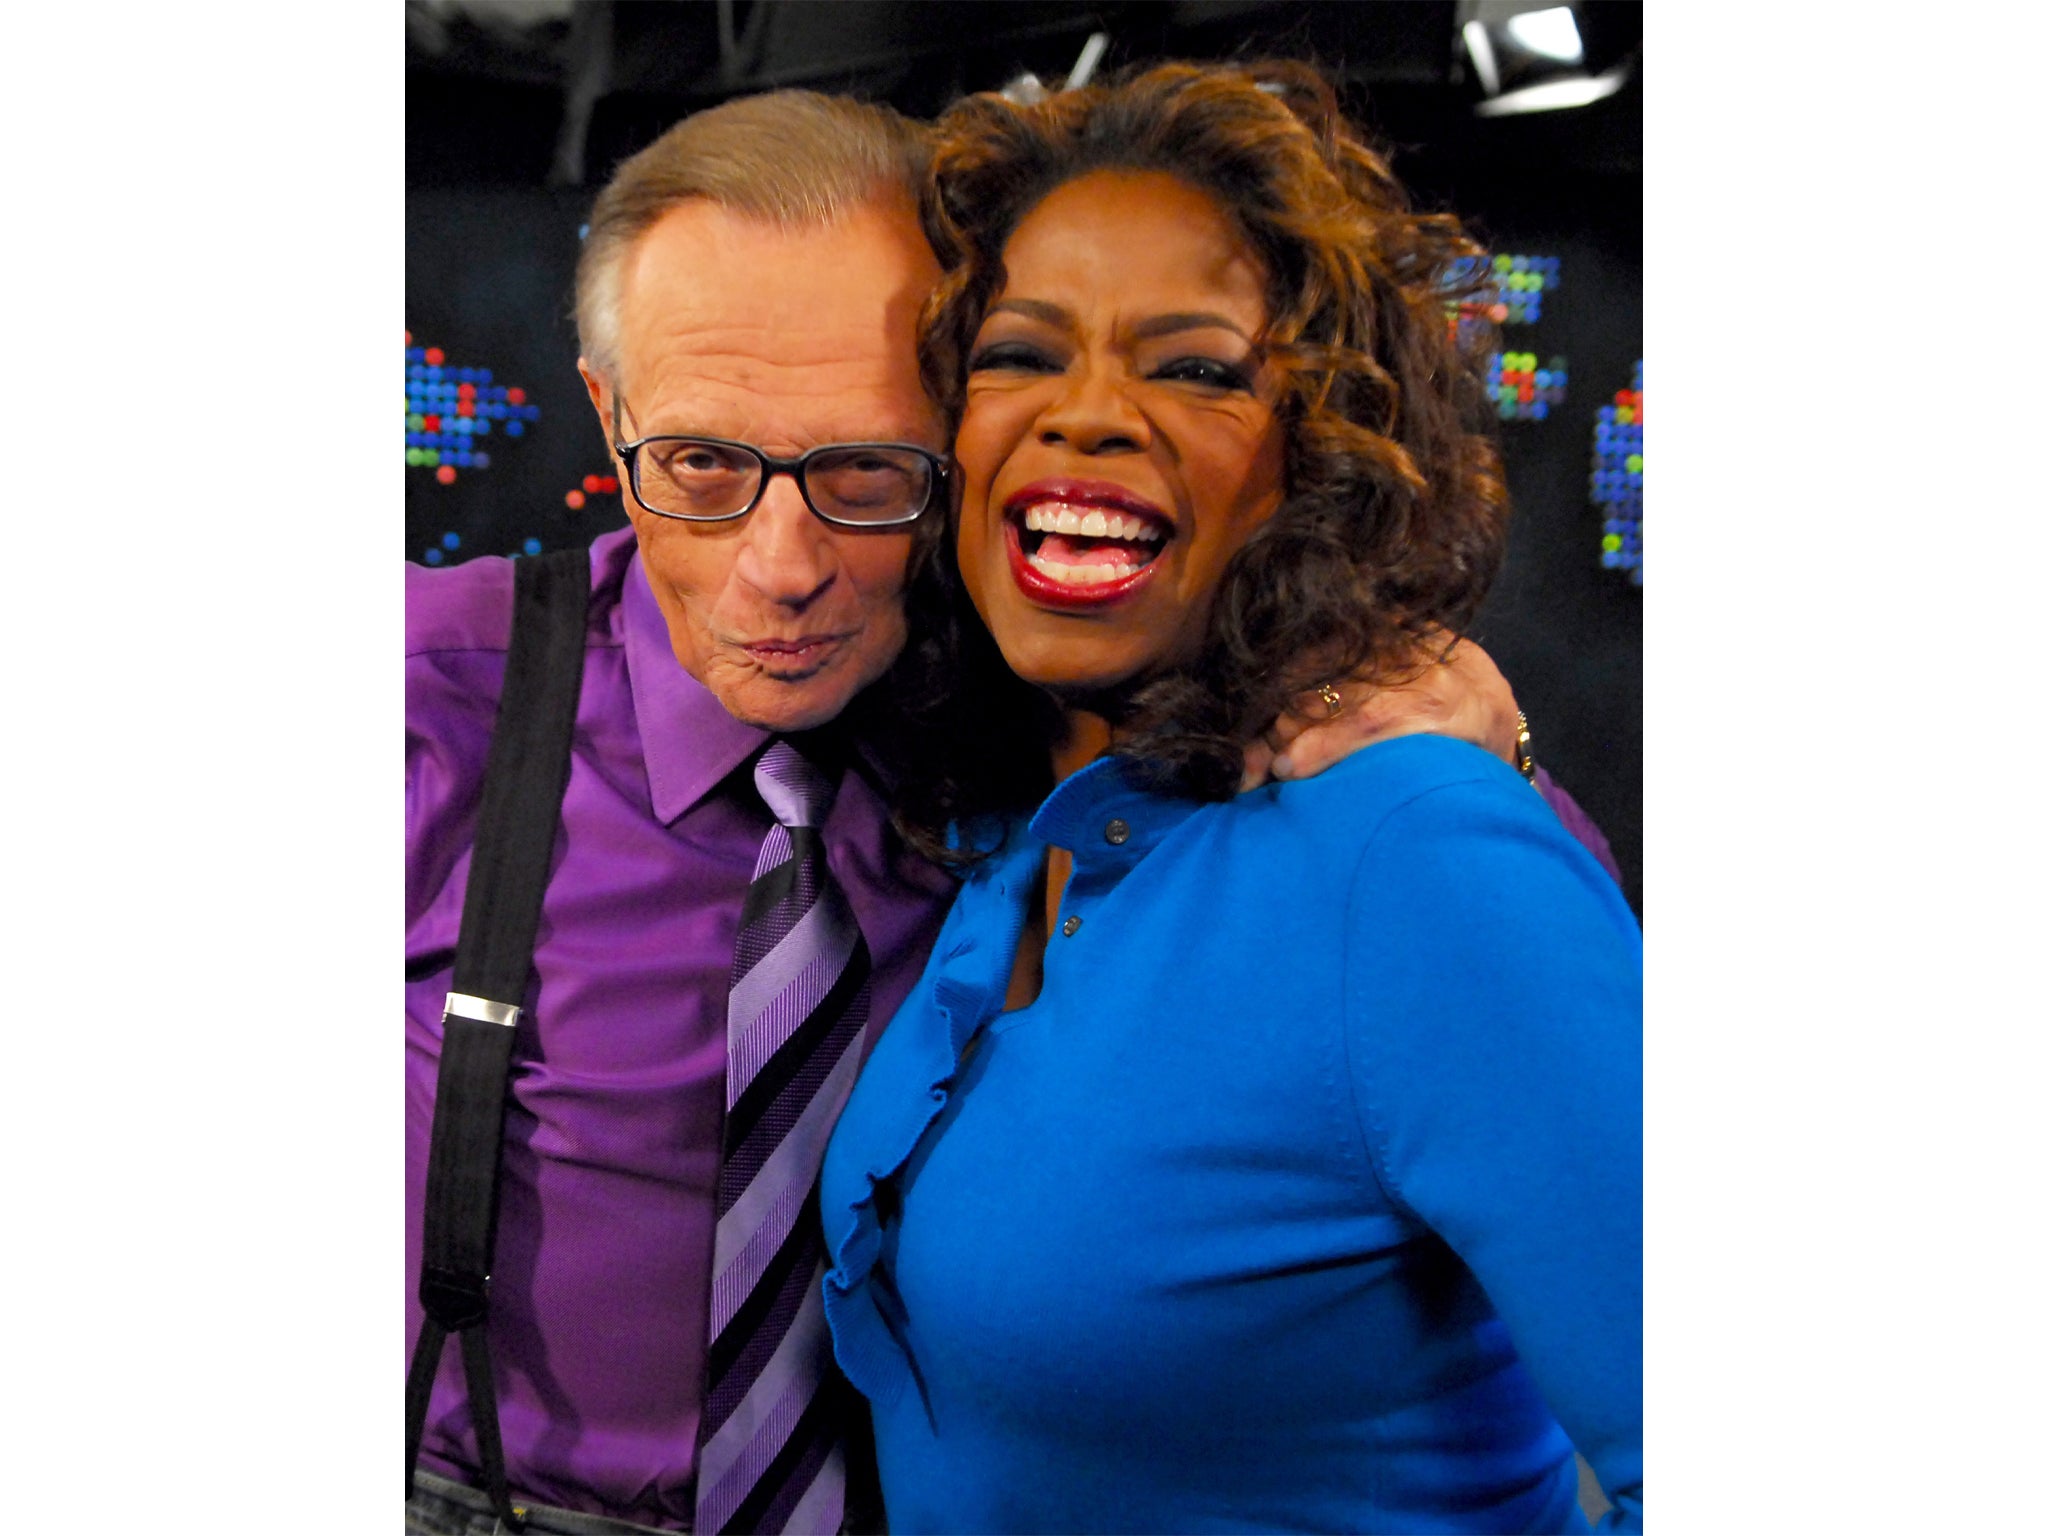 Oprah Winfrey joins King for his 50th anniversary in broadcasting